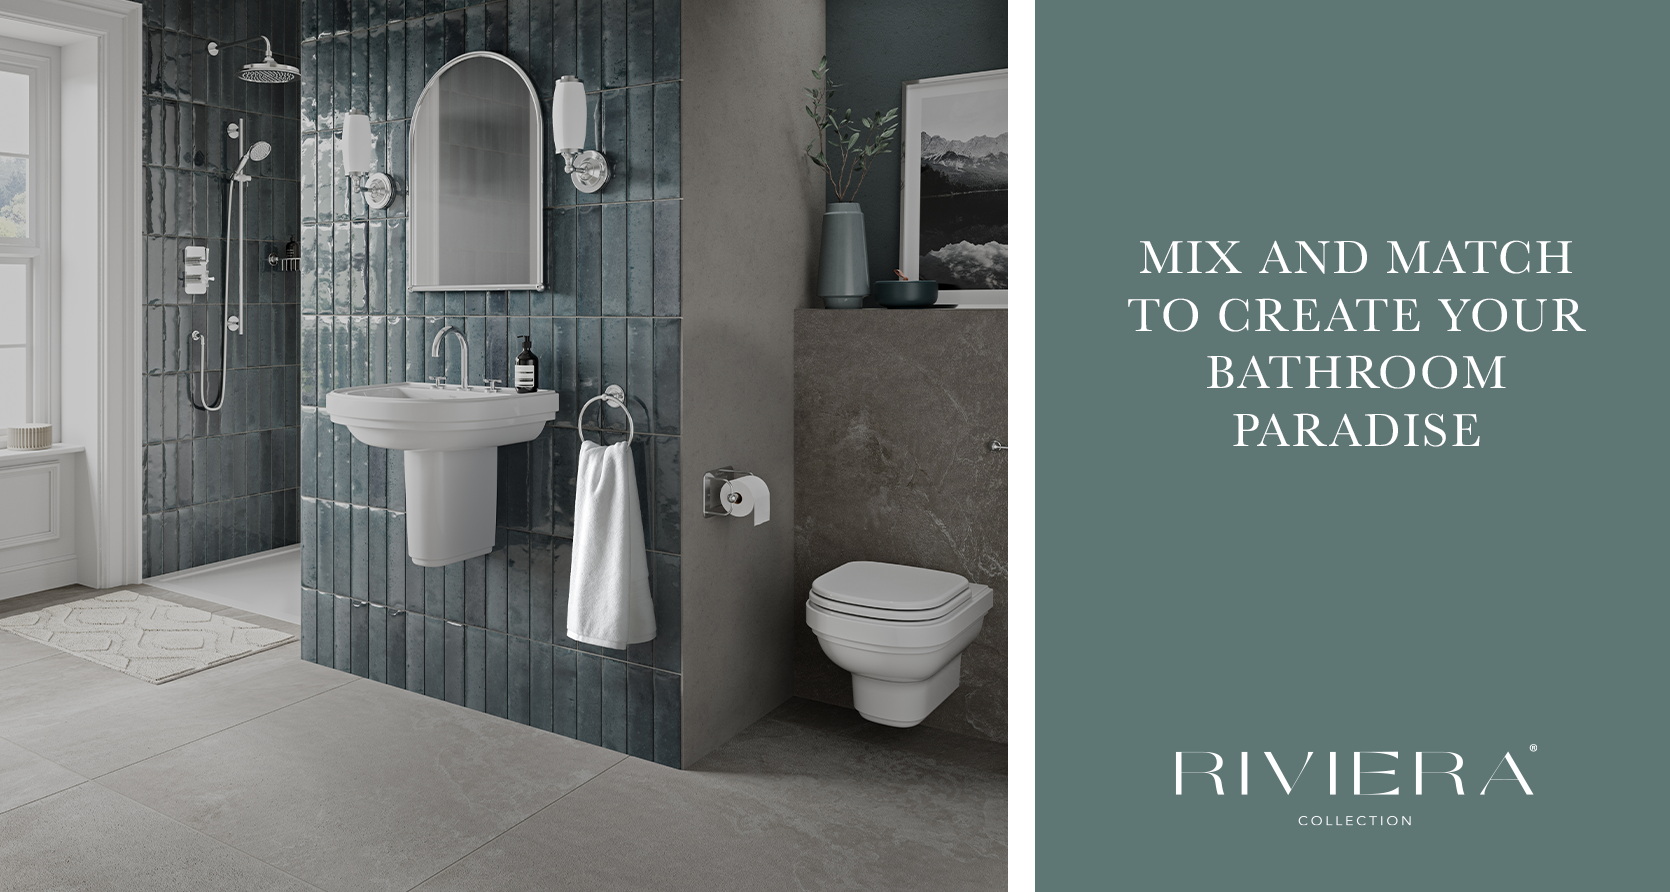 Art Deco bathroom | Uncover a modern traditional bathroom unlike any other with the 1920s inspired Riviera collection